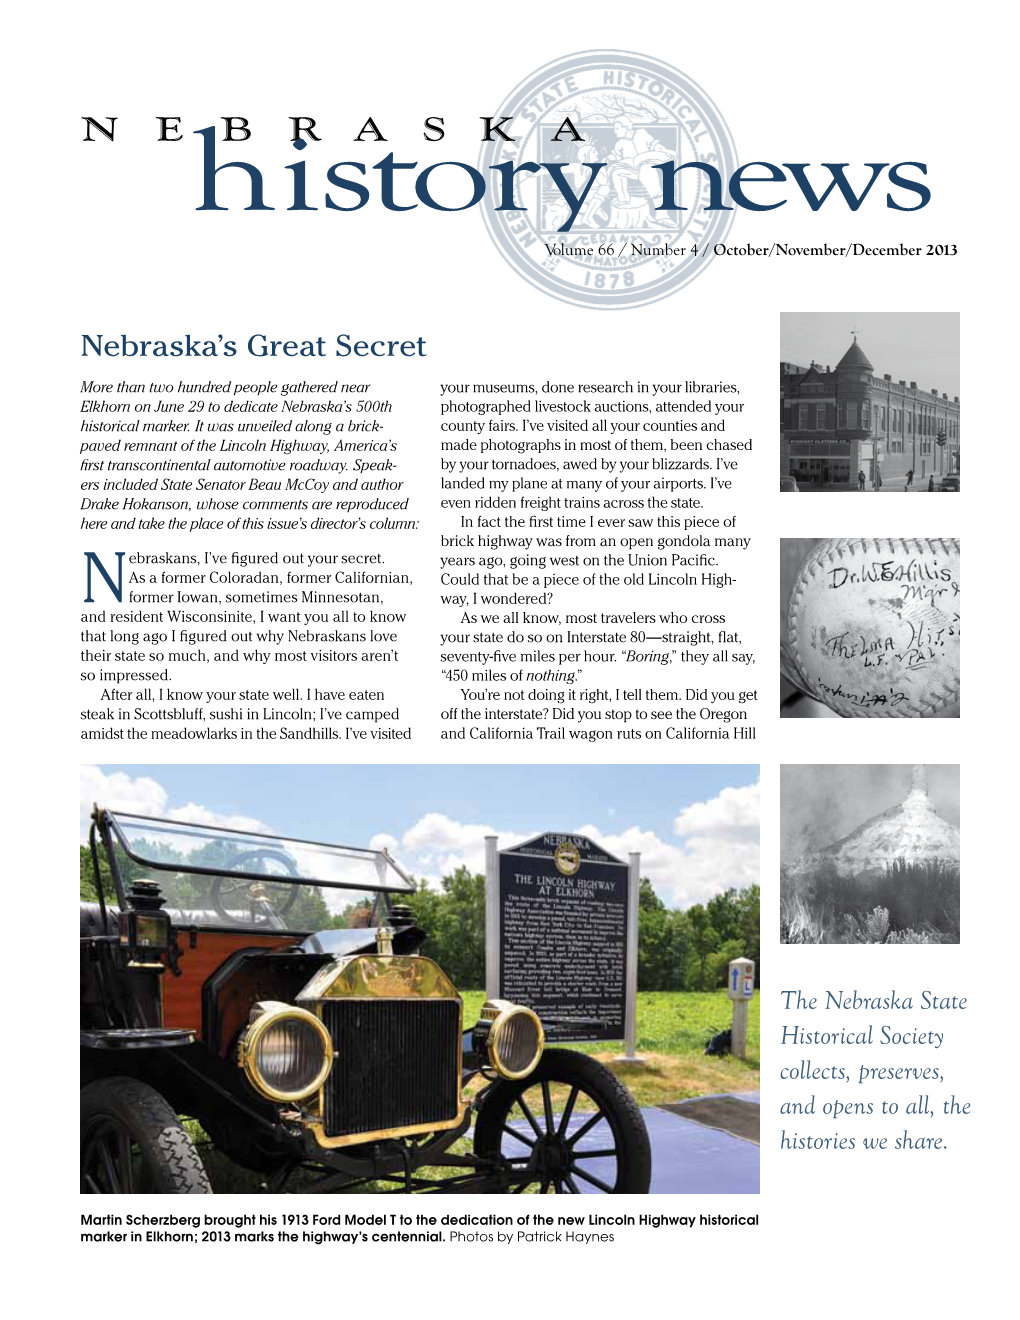 History News Ah, Nebraska—Tell Me of Your Deep History, the Historic Preservation Great Pathways of the American Story